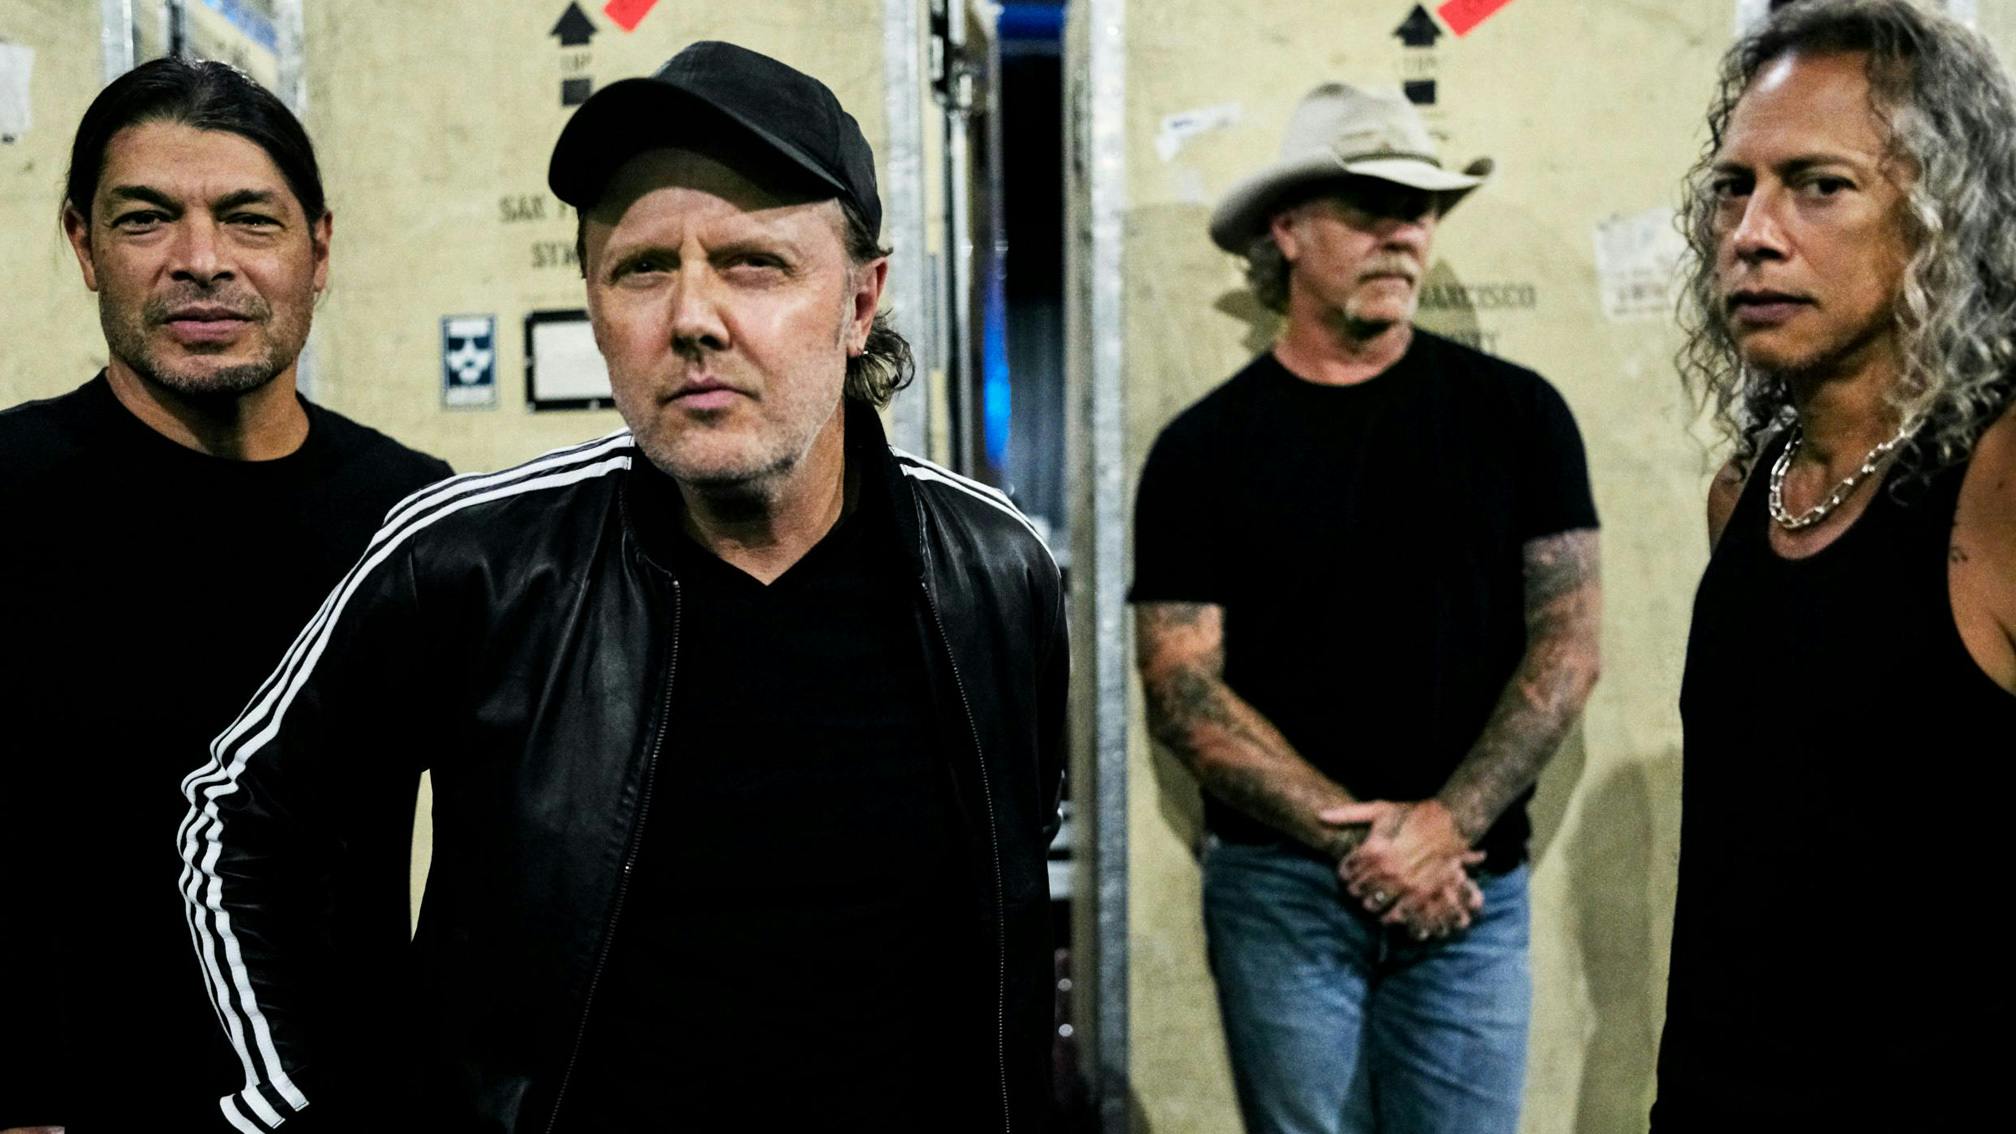 Lars Ulrich on Metallica's future: "Of course there's new music coming… but there's nothing cohesive"